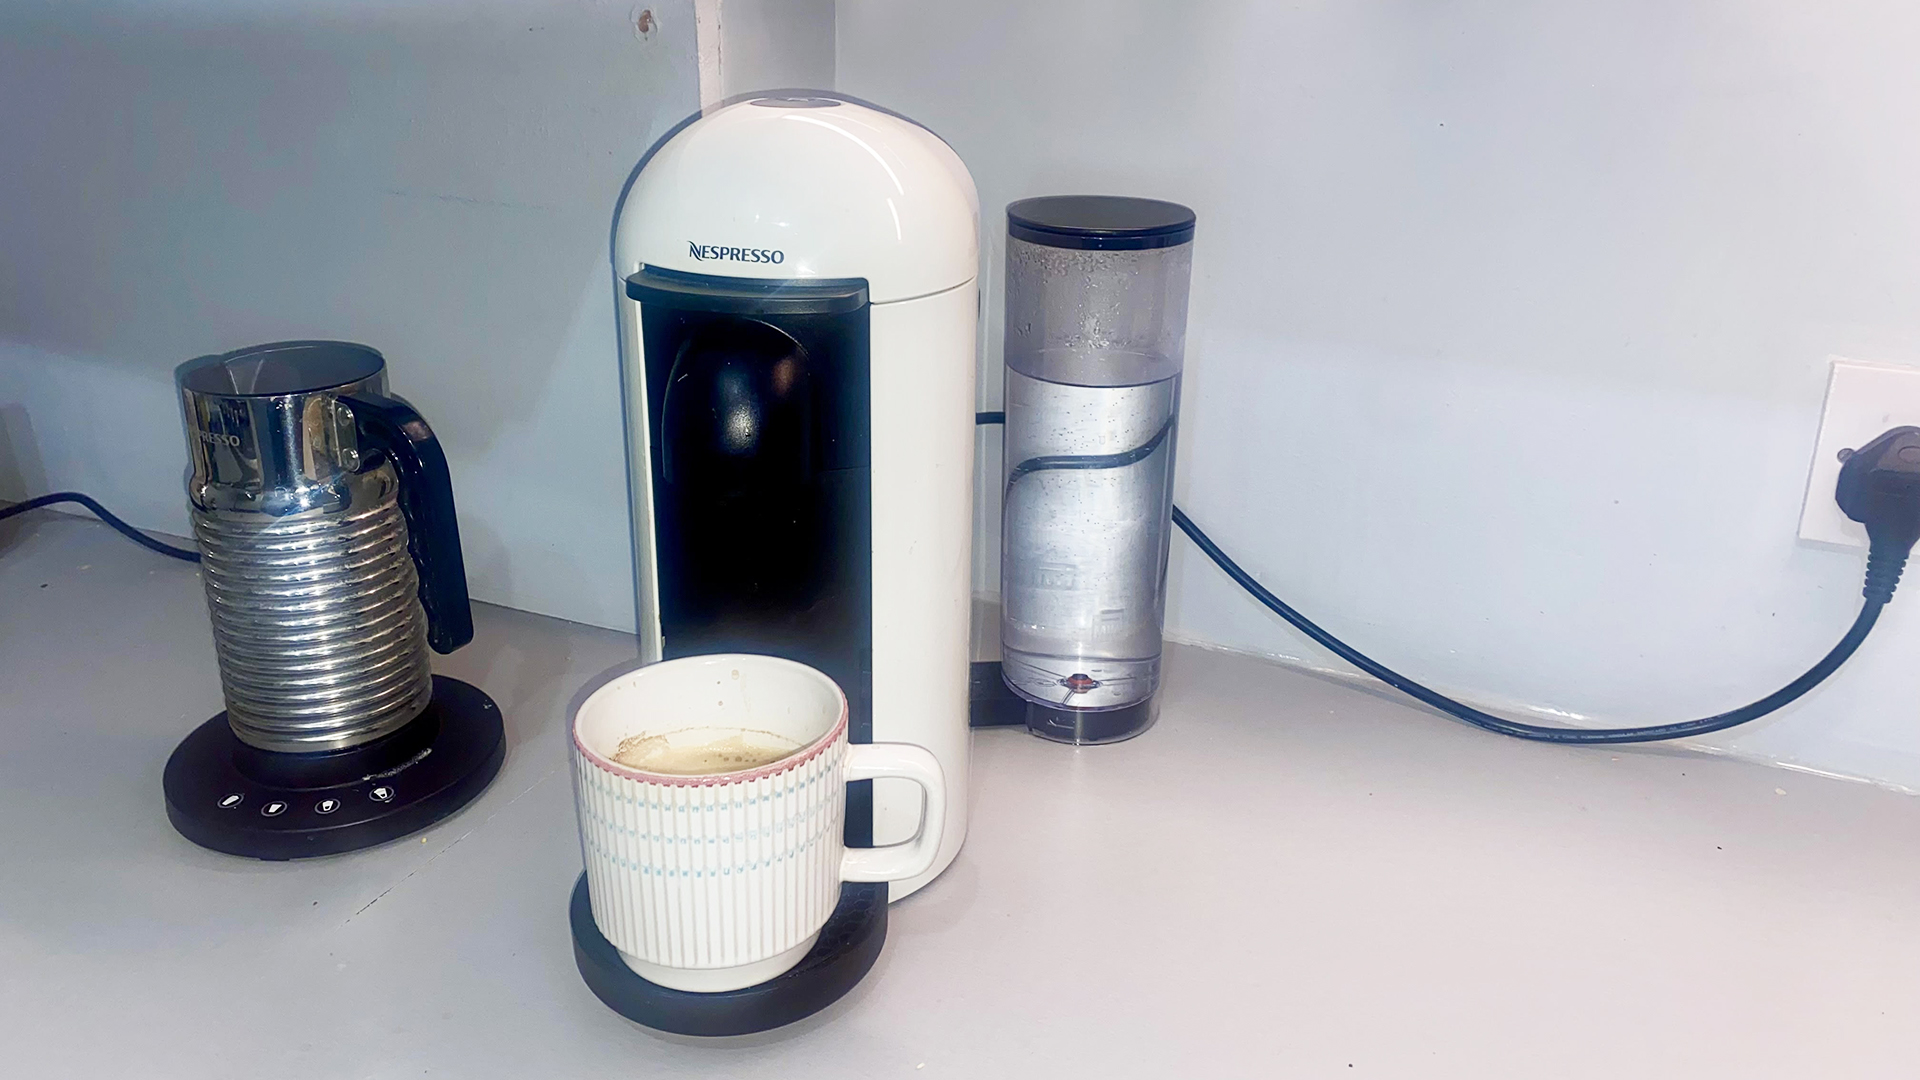 Don't avoid the grind - here's how I clean my Nespresso machine for perfect coffee